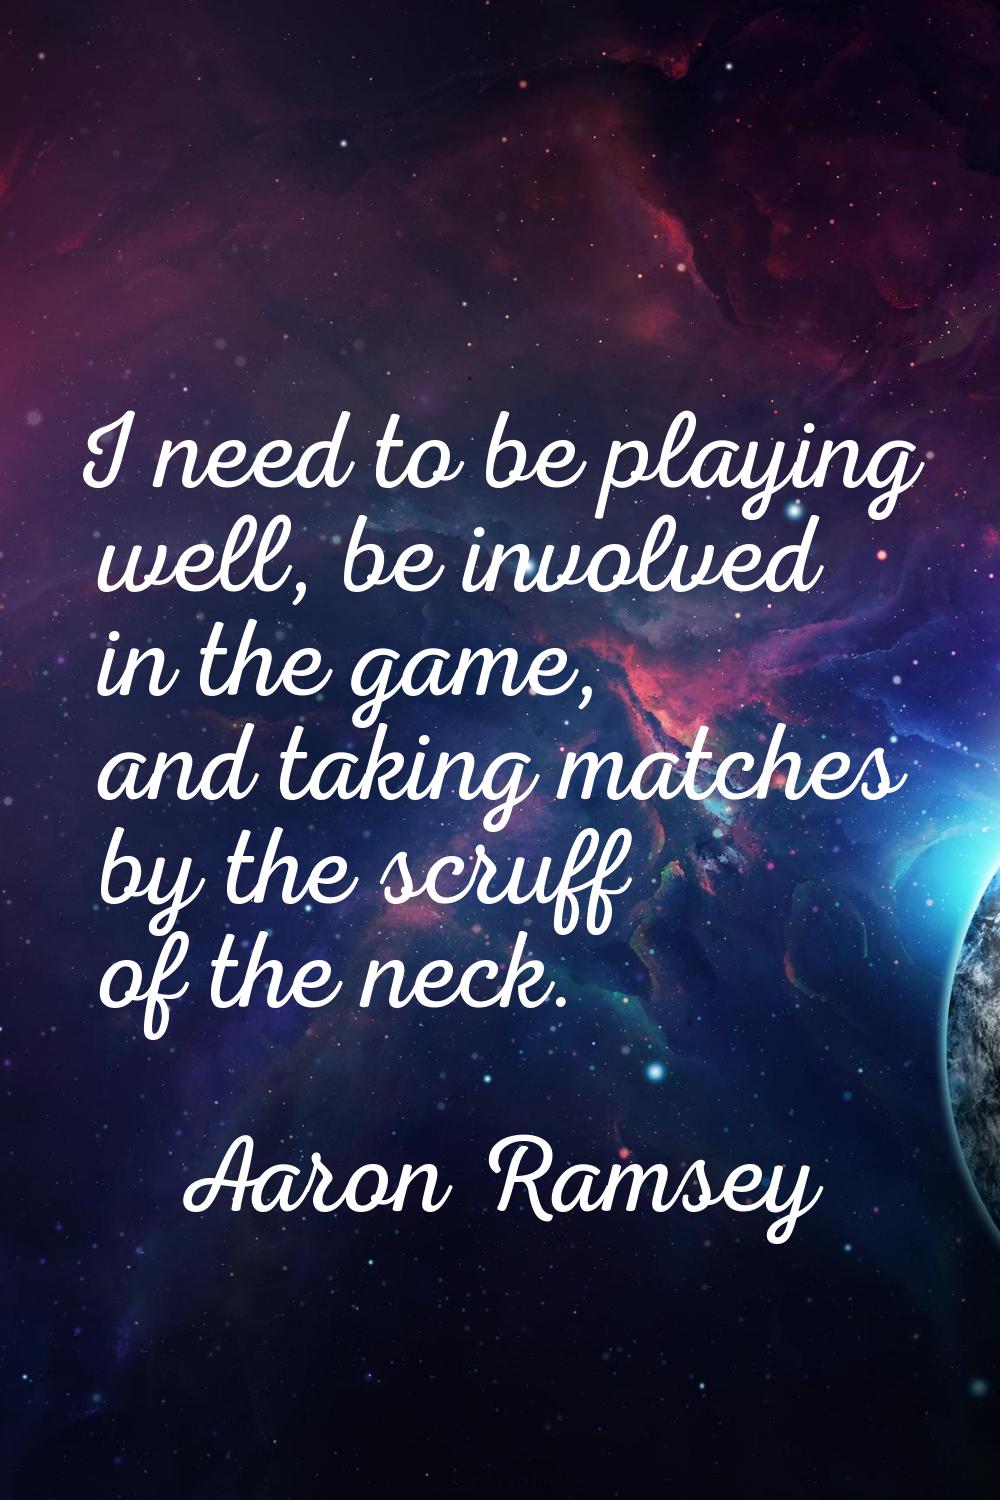 I need to be playing well, be involved in the game, and taking matches by the scruff of the neck.